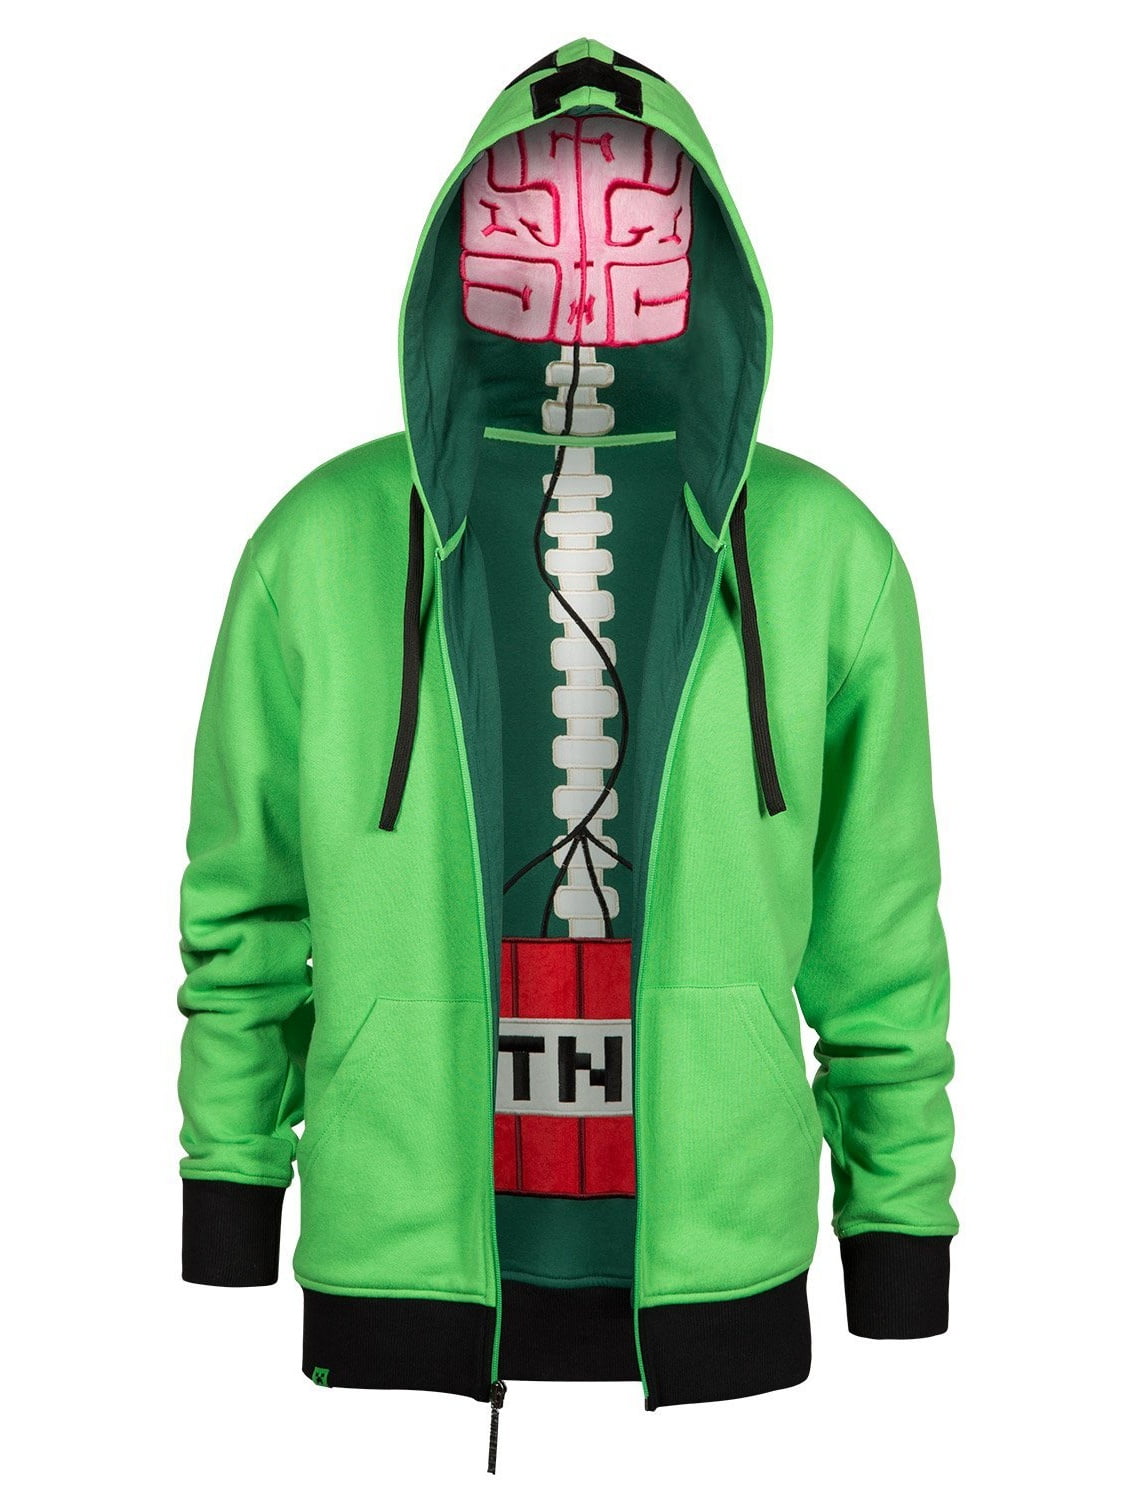 Minecraft Official Creeper Inside Boy's Hoodie 